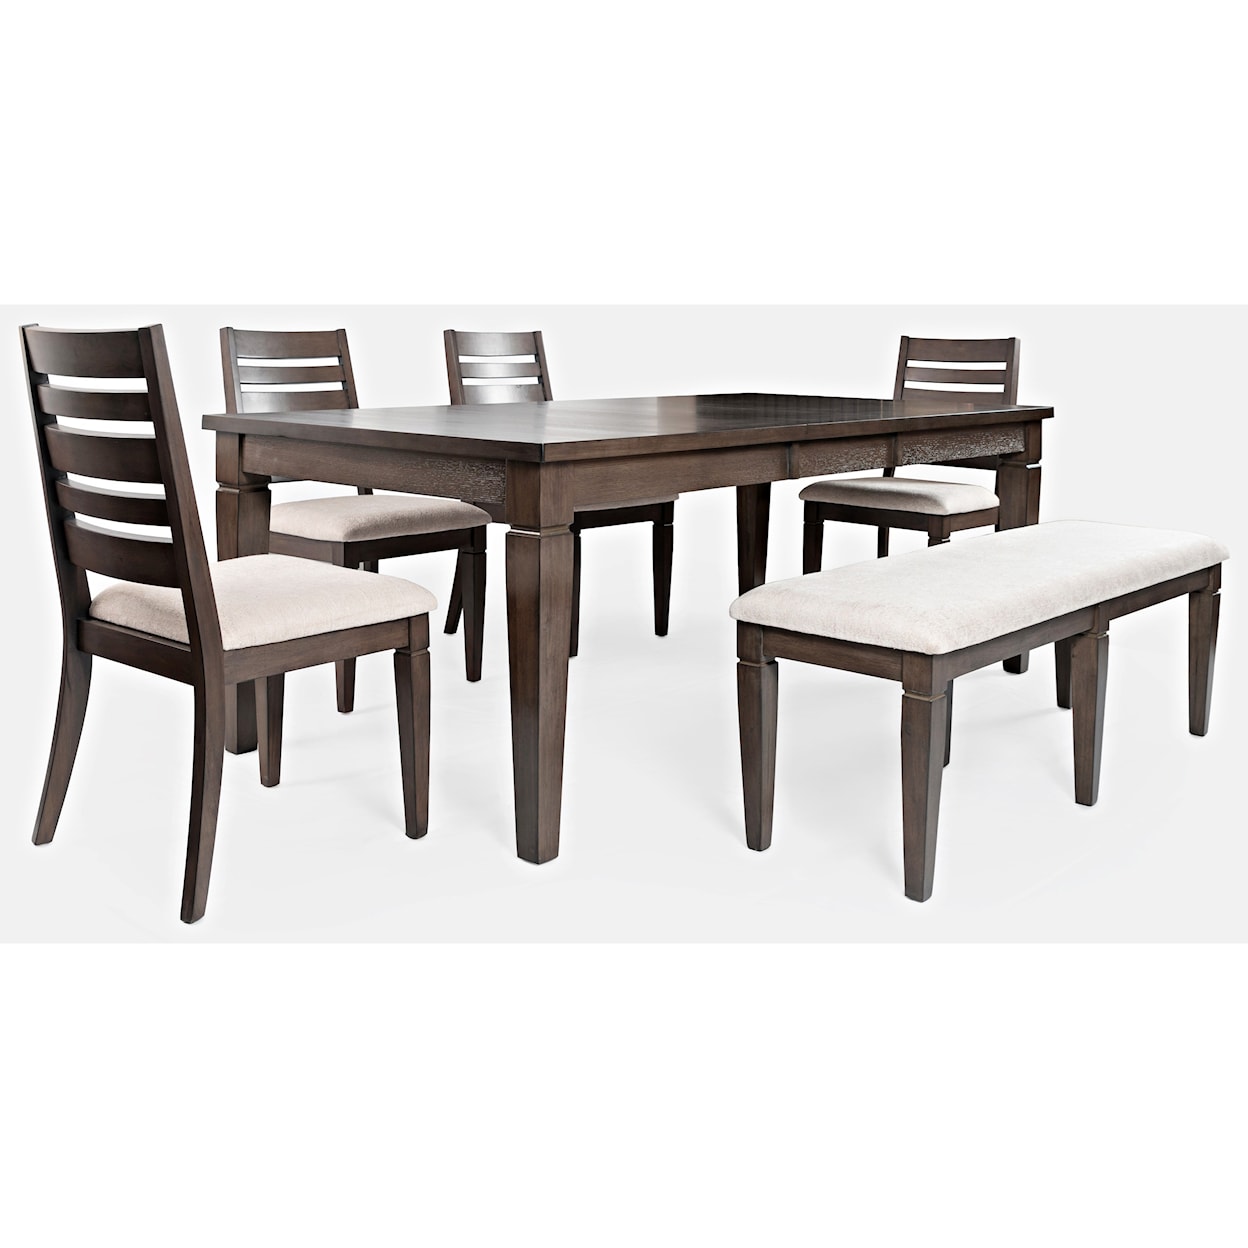 Jofran Lincoln Square 6pc Dining Room Group